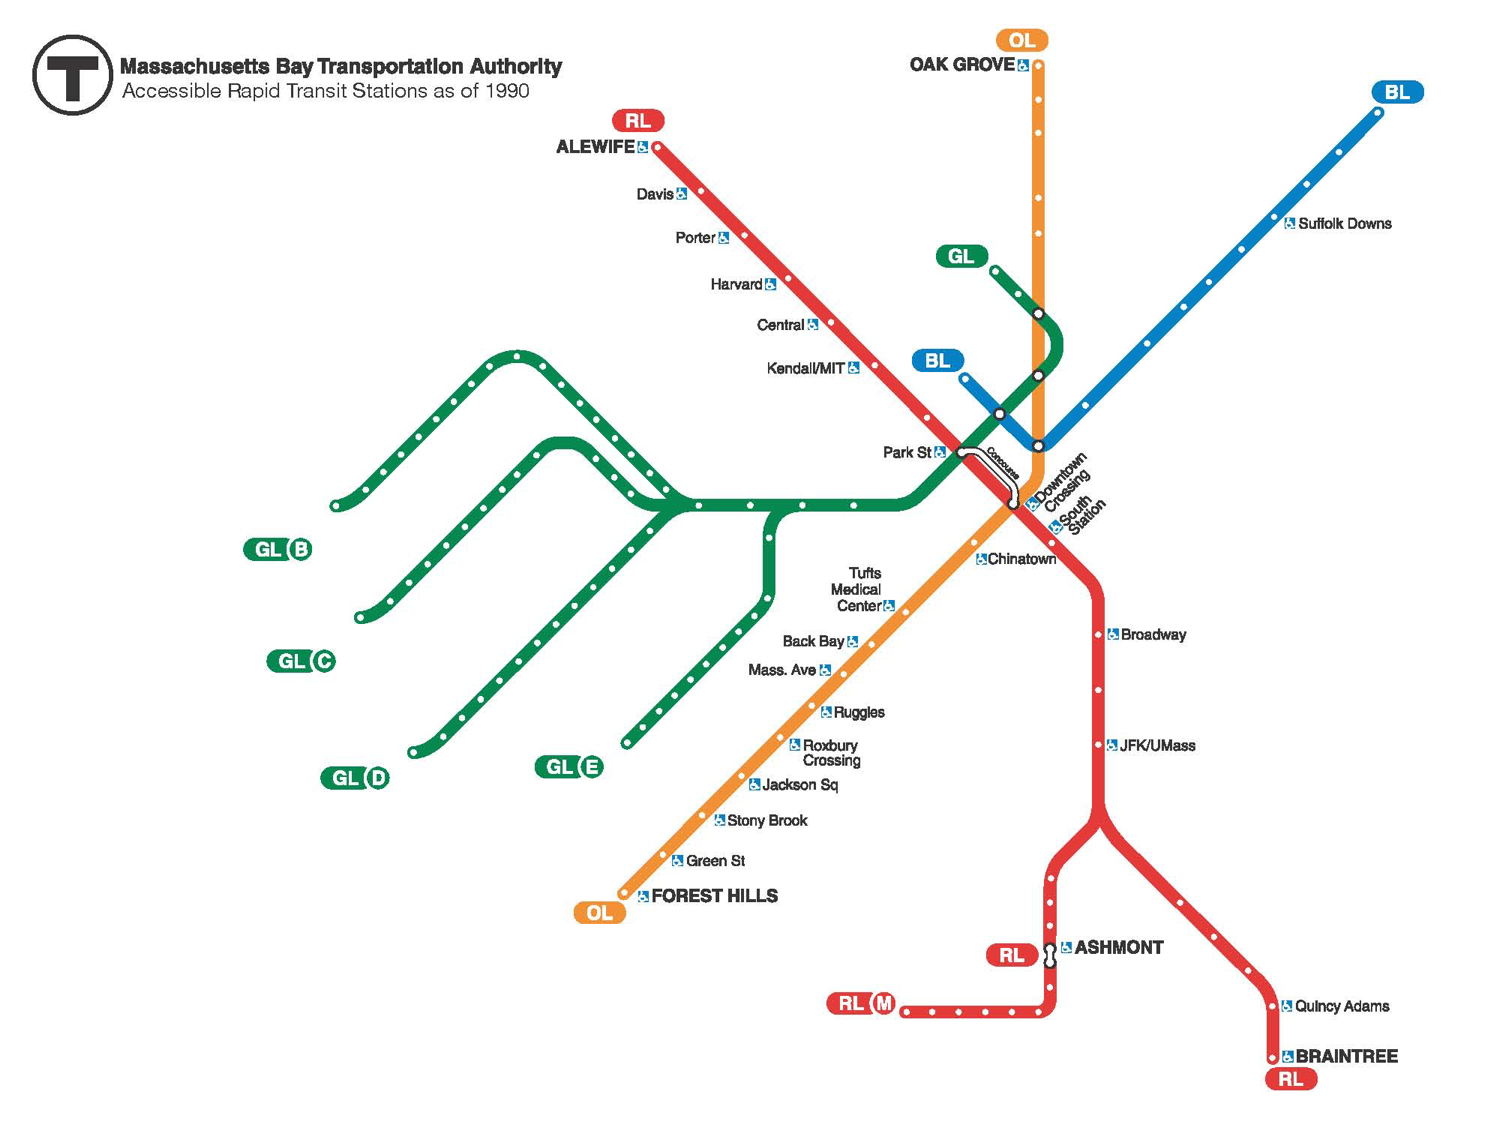 mbta-accessible-stations-early-2000s.png